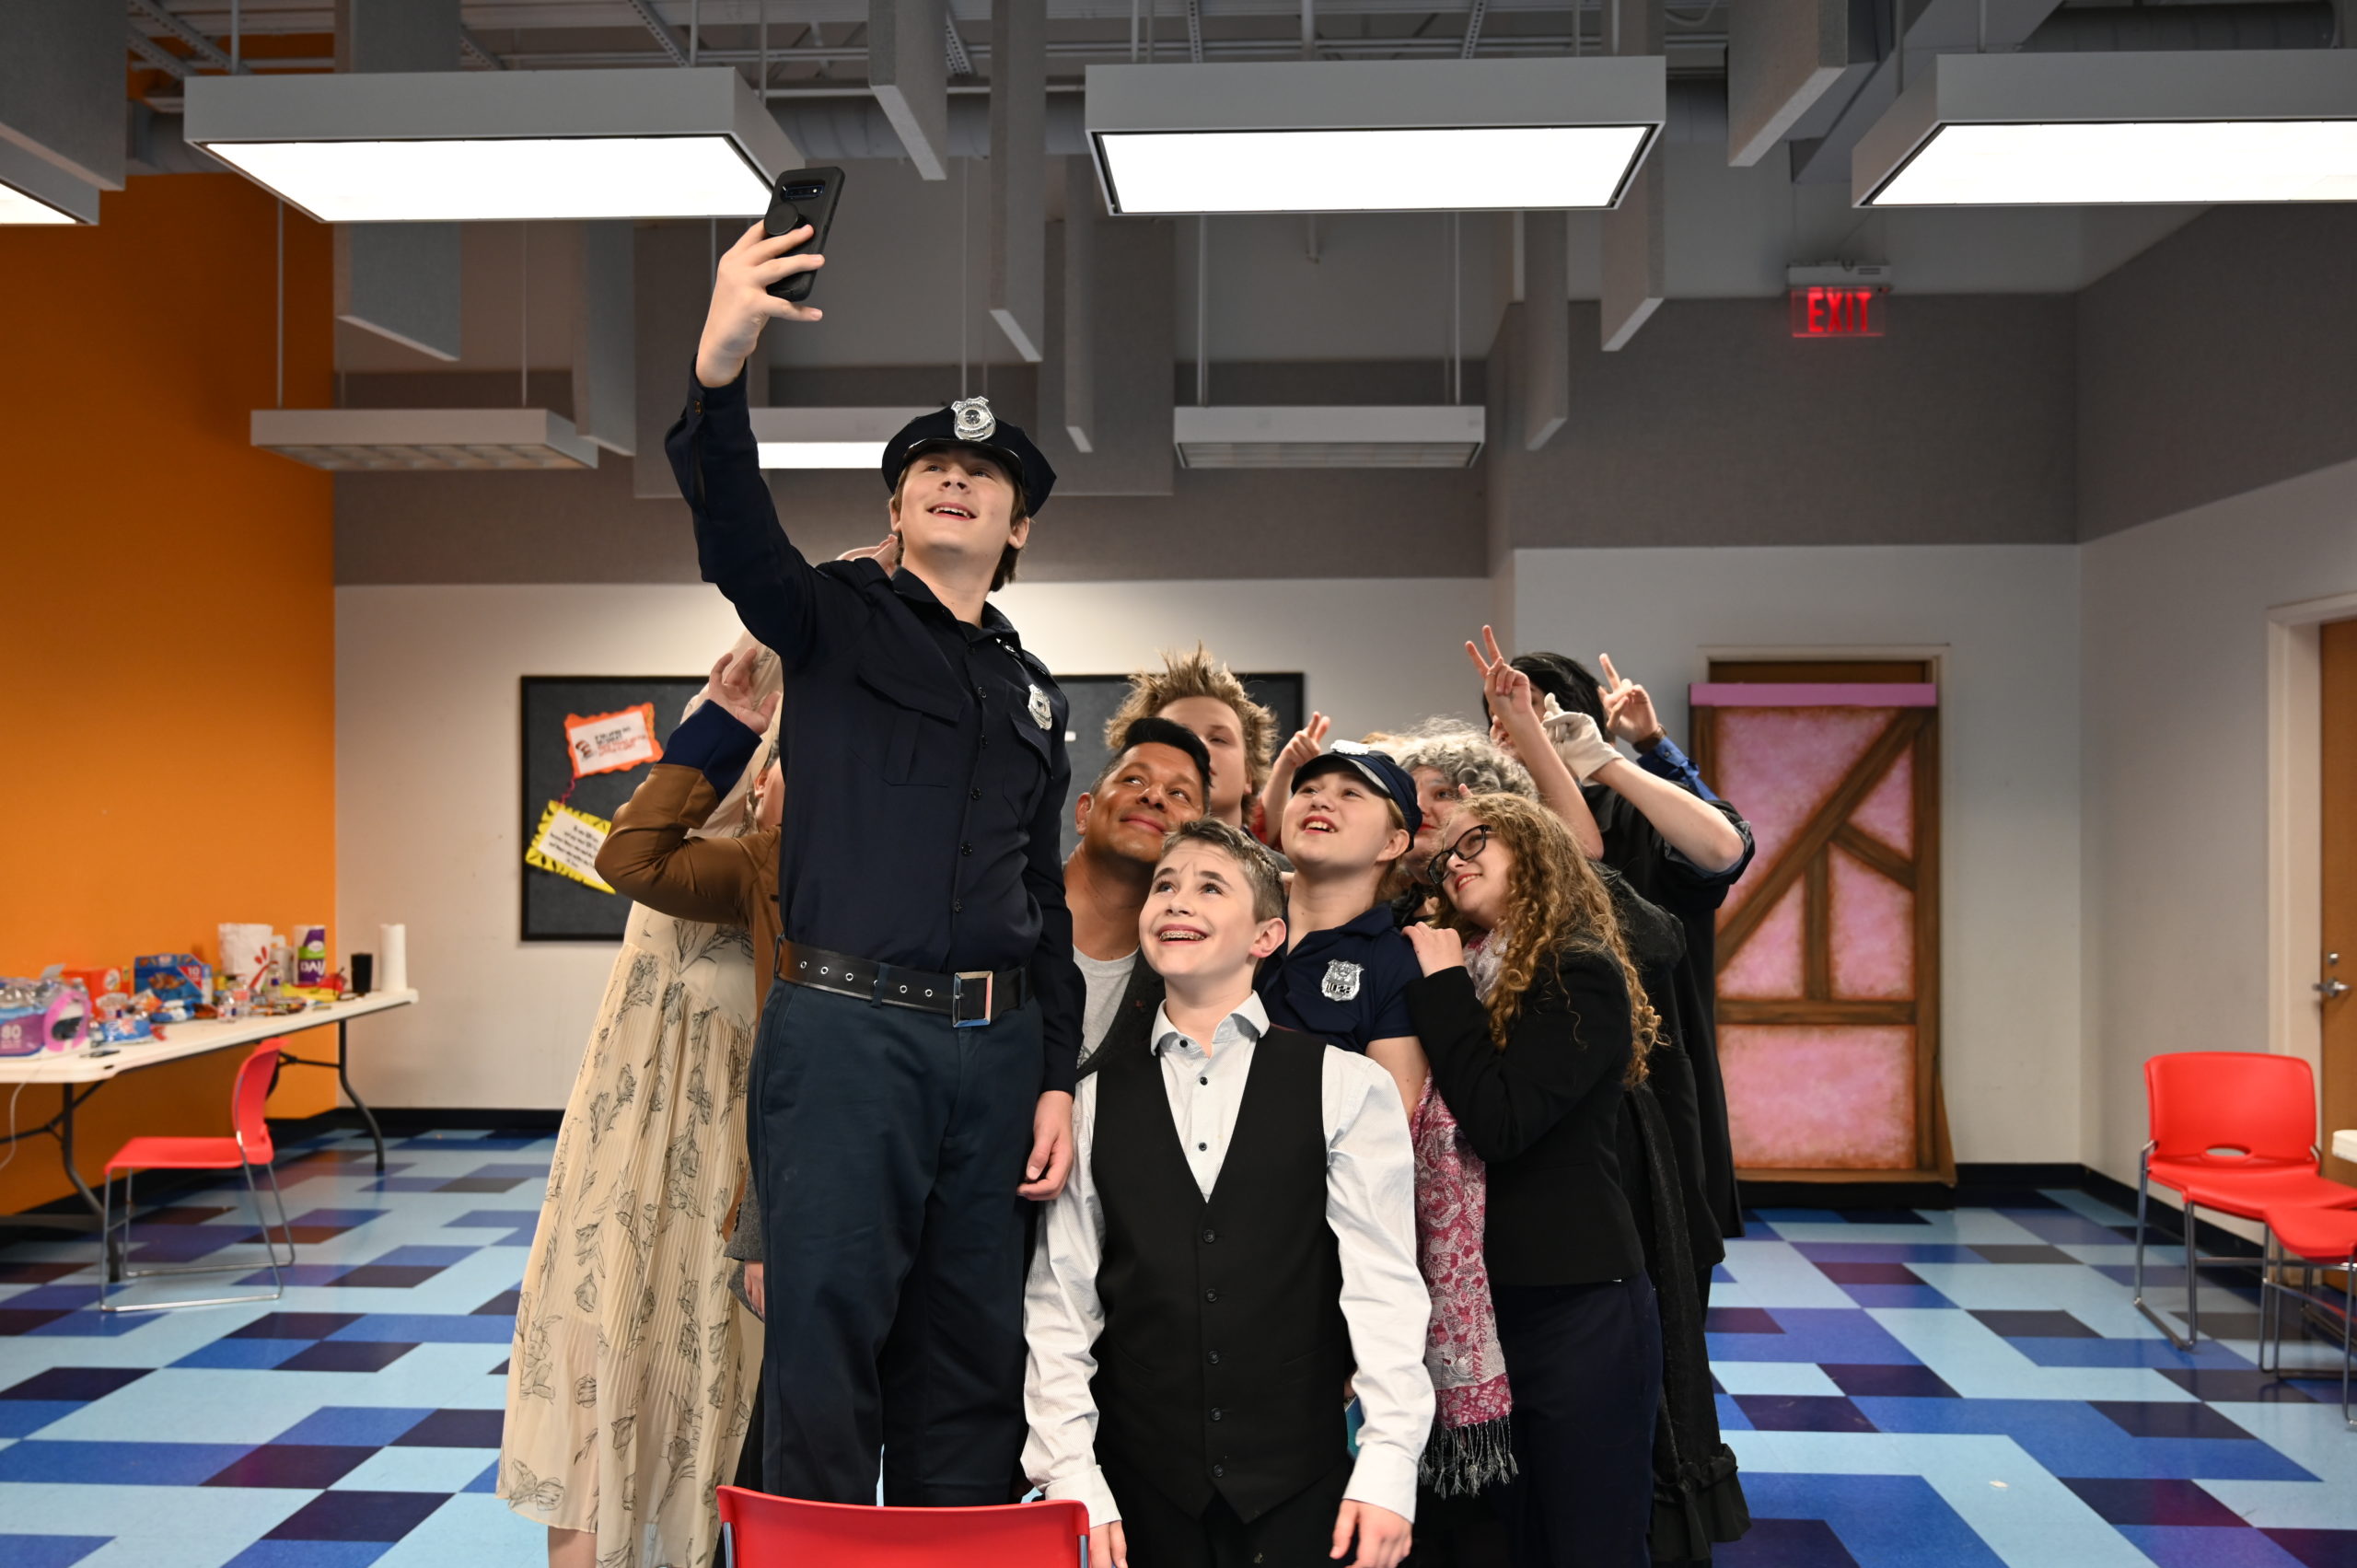 student theatre production at the Einstein School